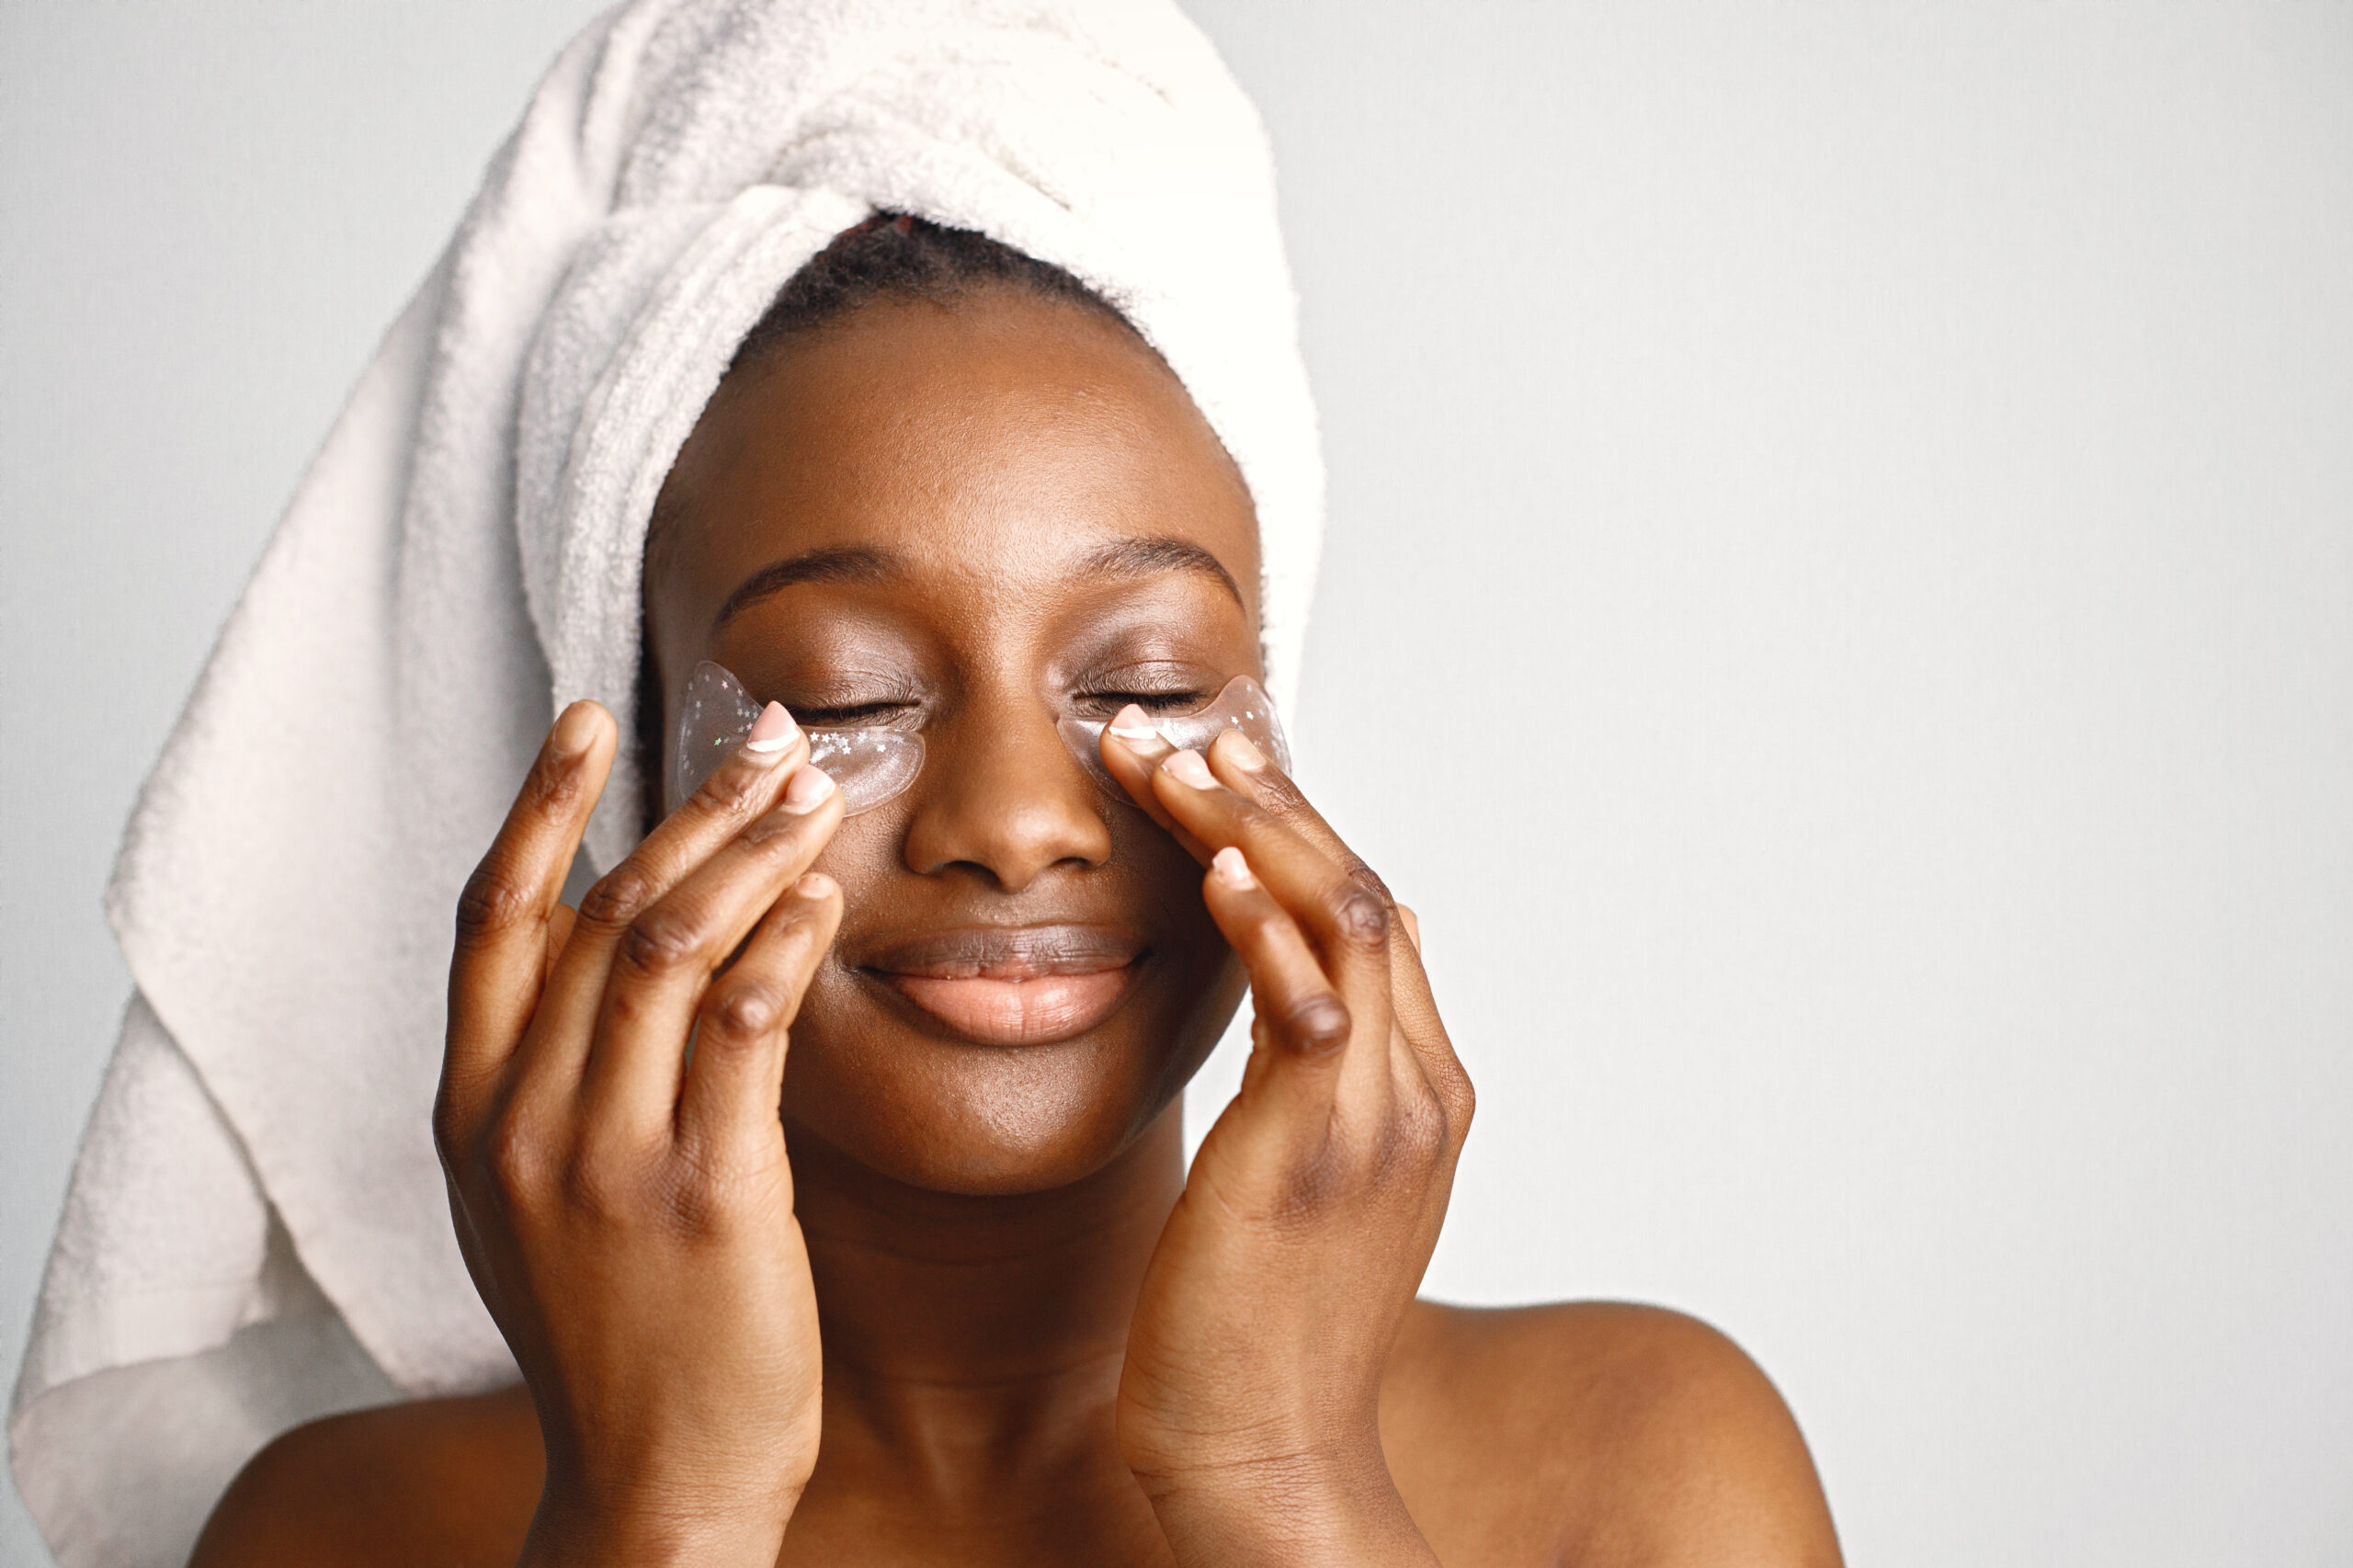 Black girl taking care of her skin with a towel on her head